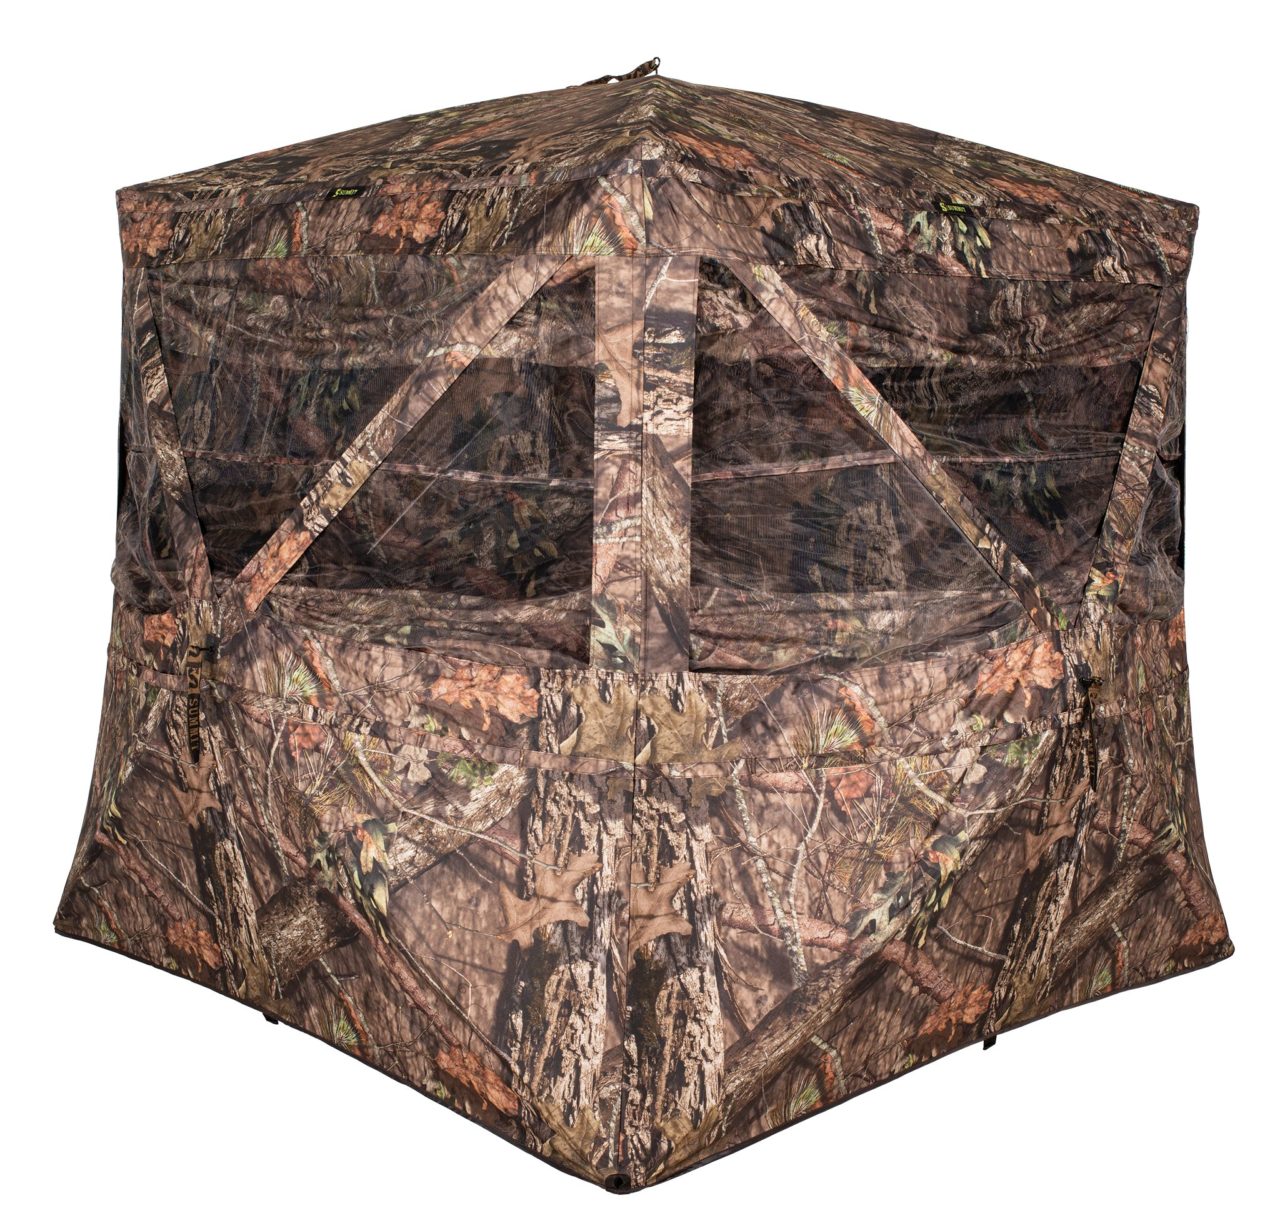 Hunt in Comfort in the New Summit Goliath Ground Blind